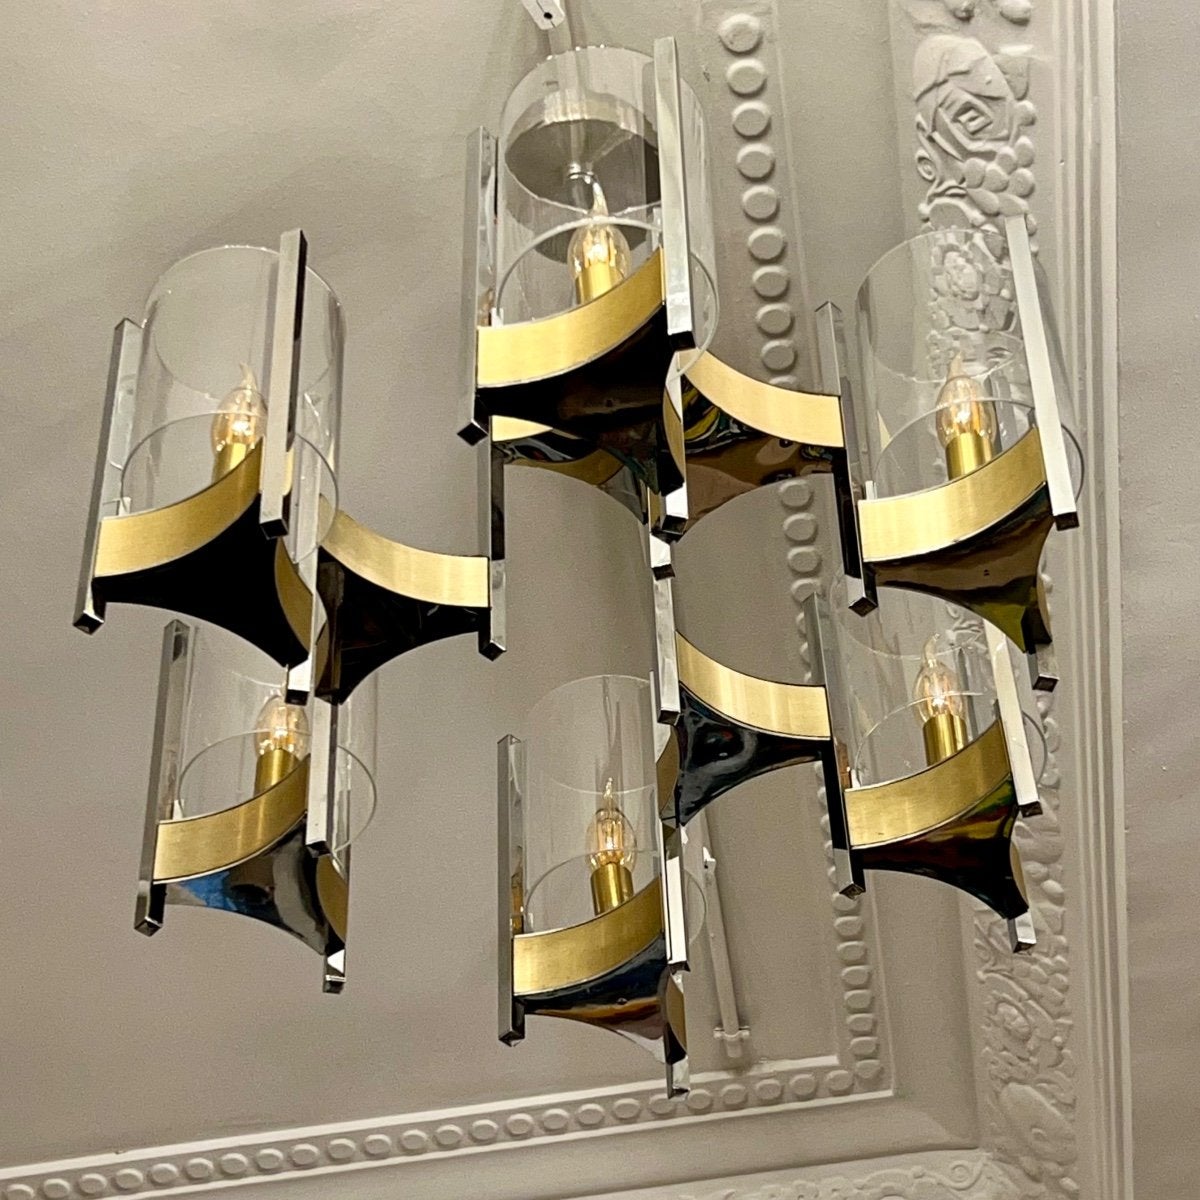 We present you with this magnificent chandelier by the Italian designer Gaetano Sciolari, featuring a blend of chrome and gold accents. Dating back to the vibrant 1960s in Italy, this piece remains in exceptional condition, complete with its